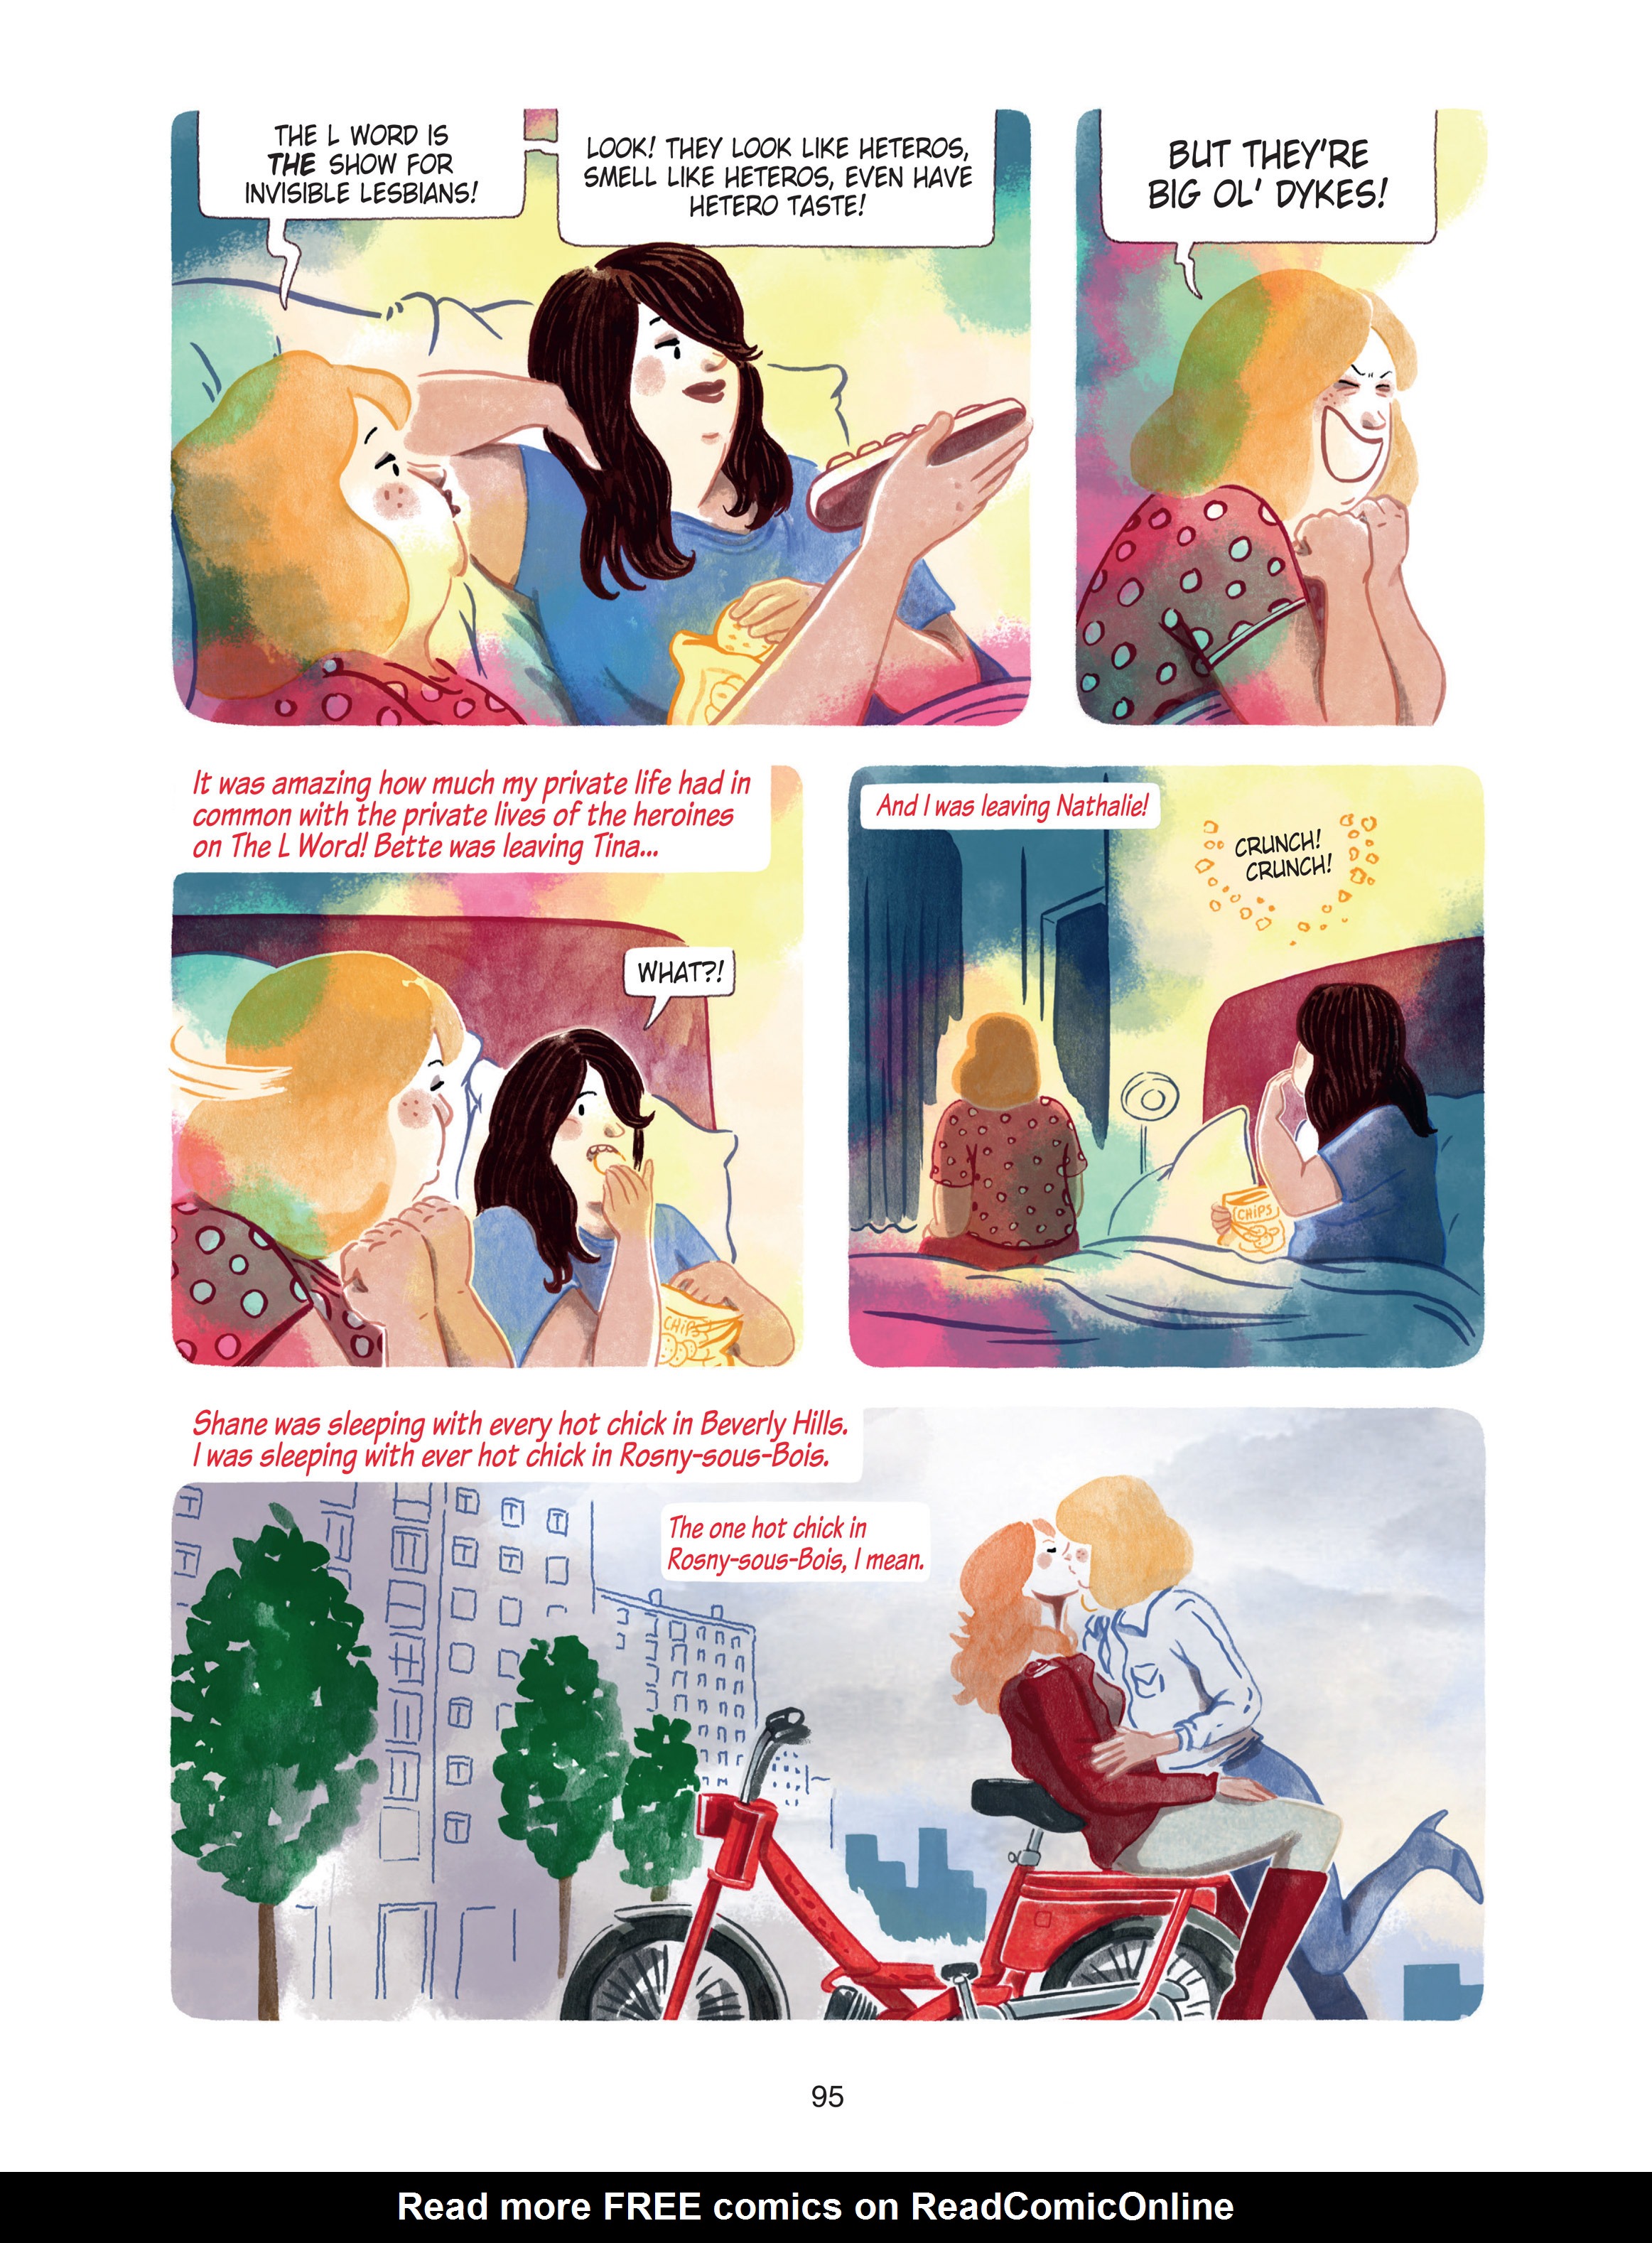 Read online The Invisible Lesbian comic -  Issue # TPB - 95